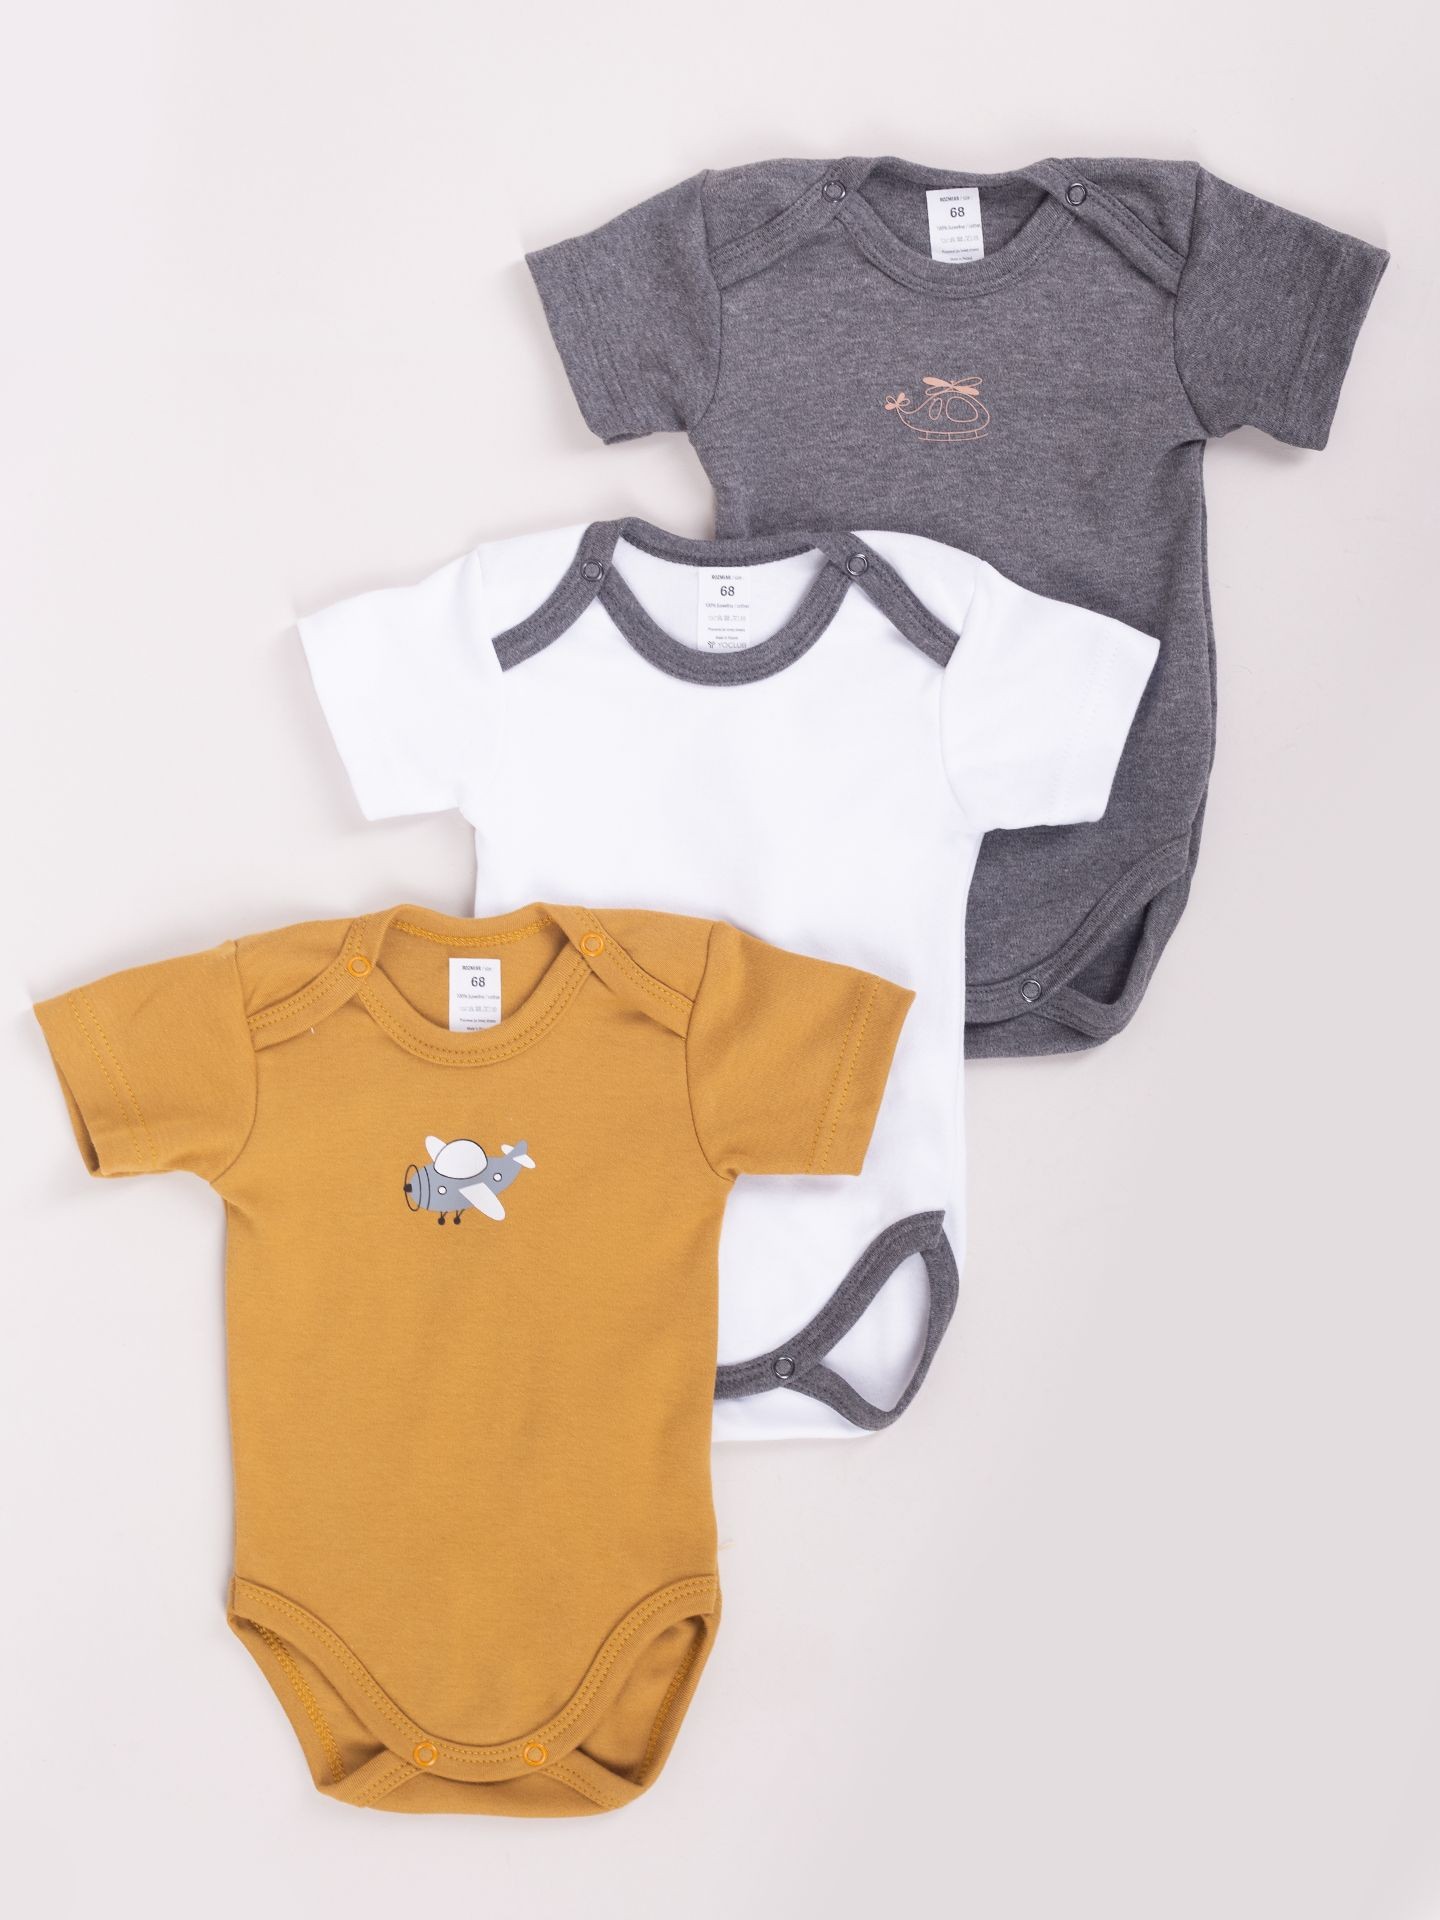 Yoclub Kids's Bodysuits With Airplanes 3-Pack BOD-0003C-A23K